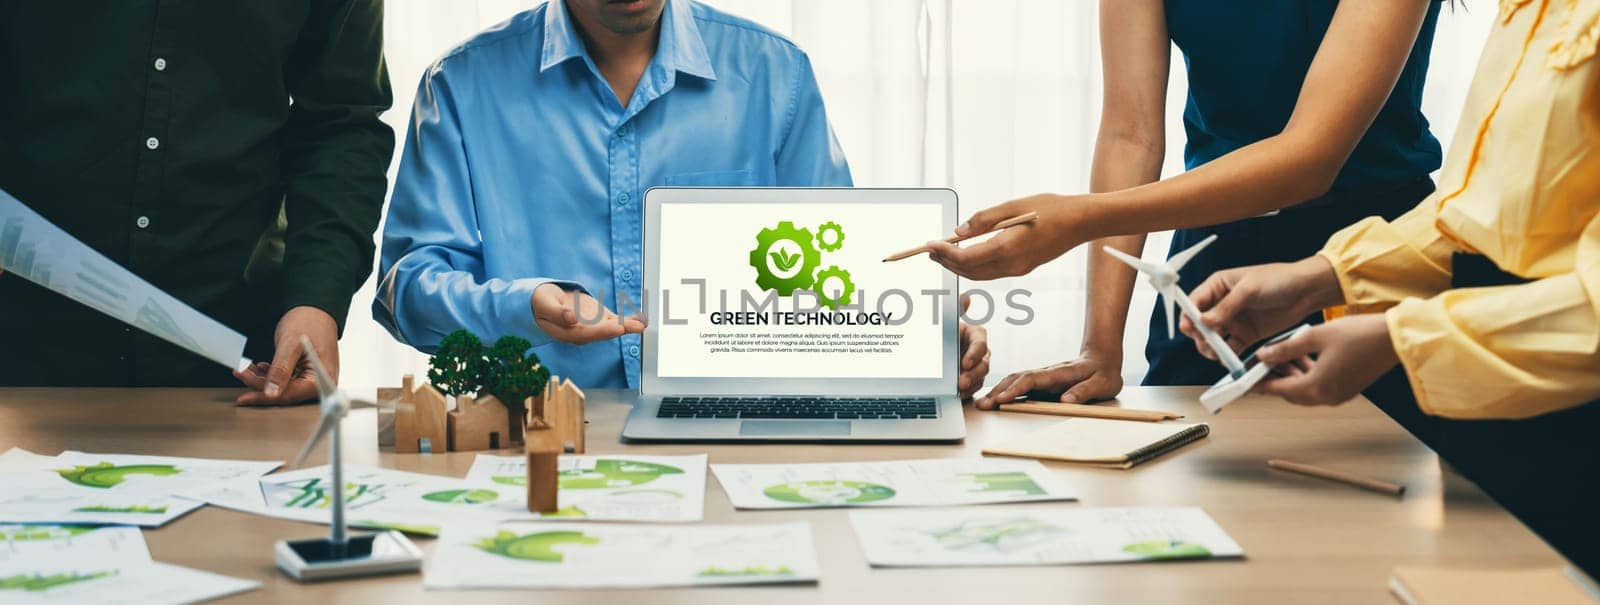 Green technology logo displayed on laptop. Eco conservative concept. Delineation by biancoblue